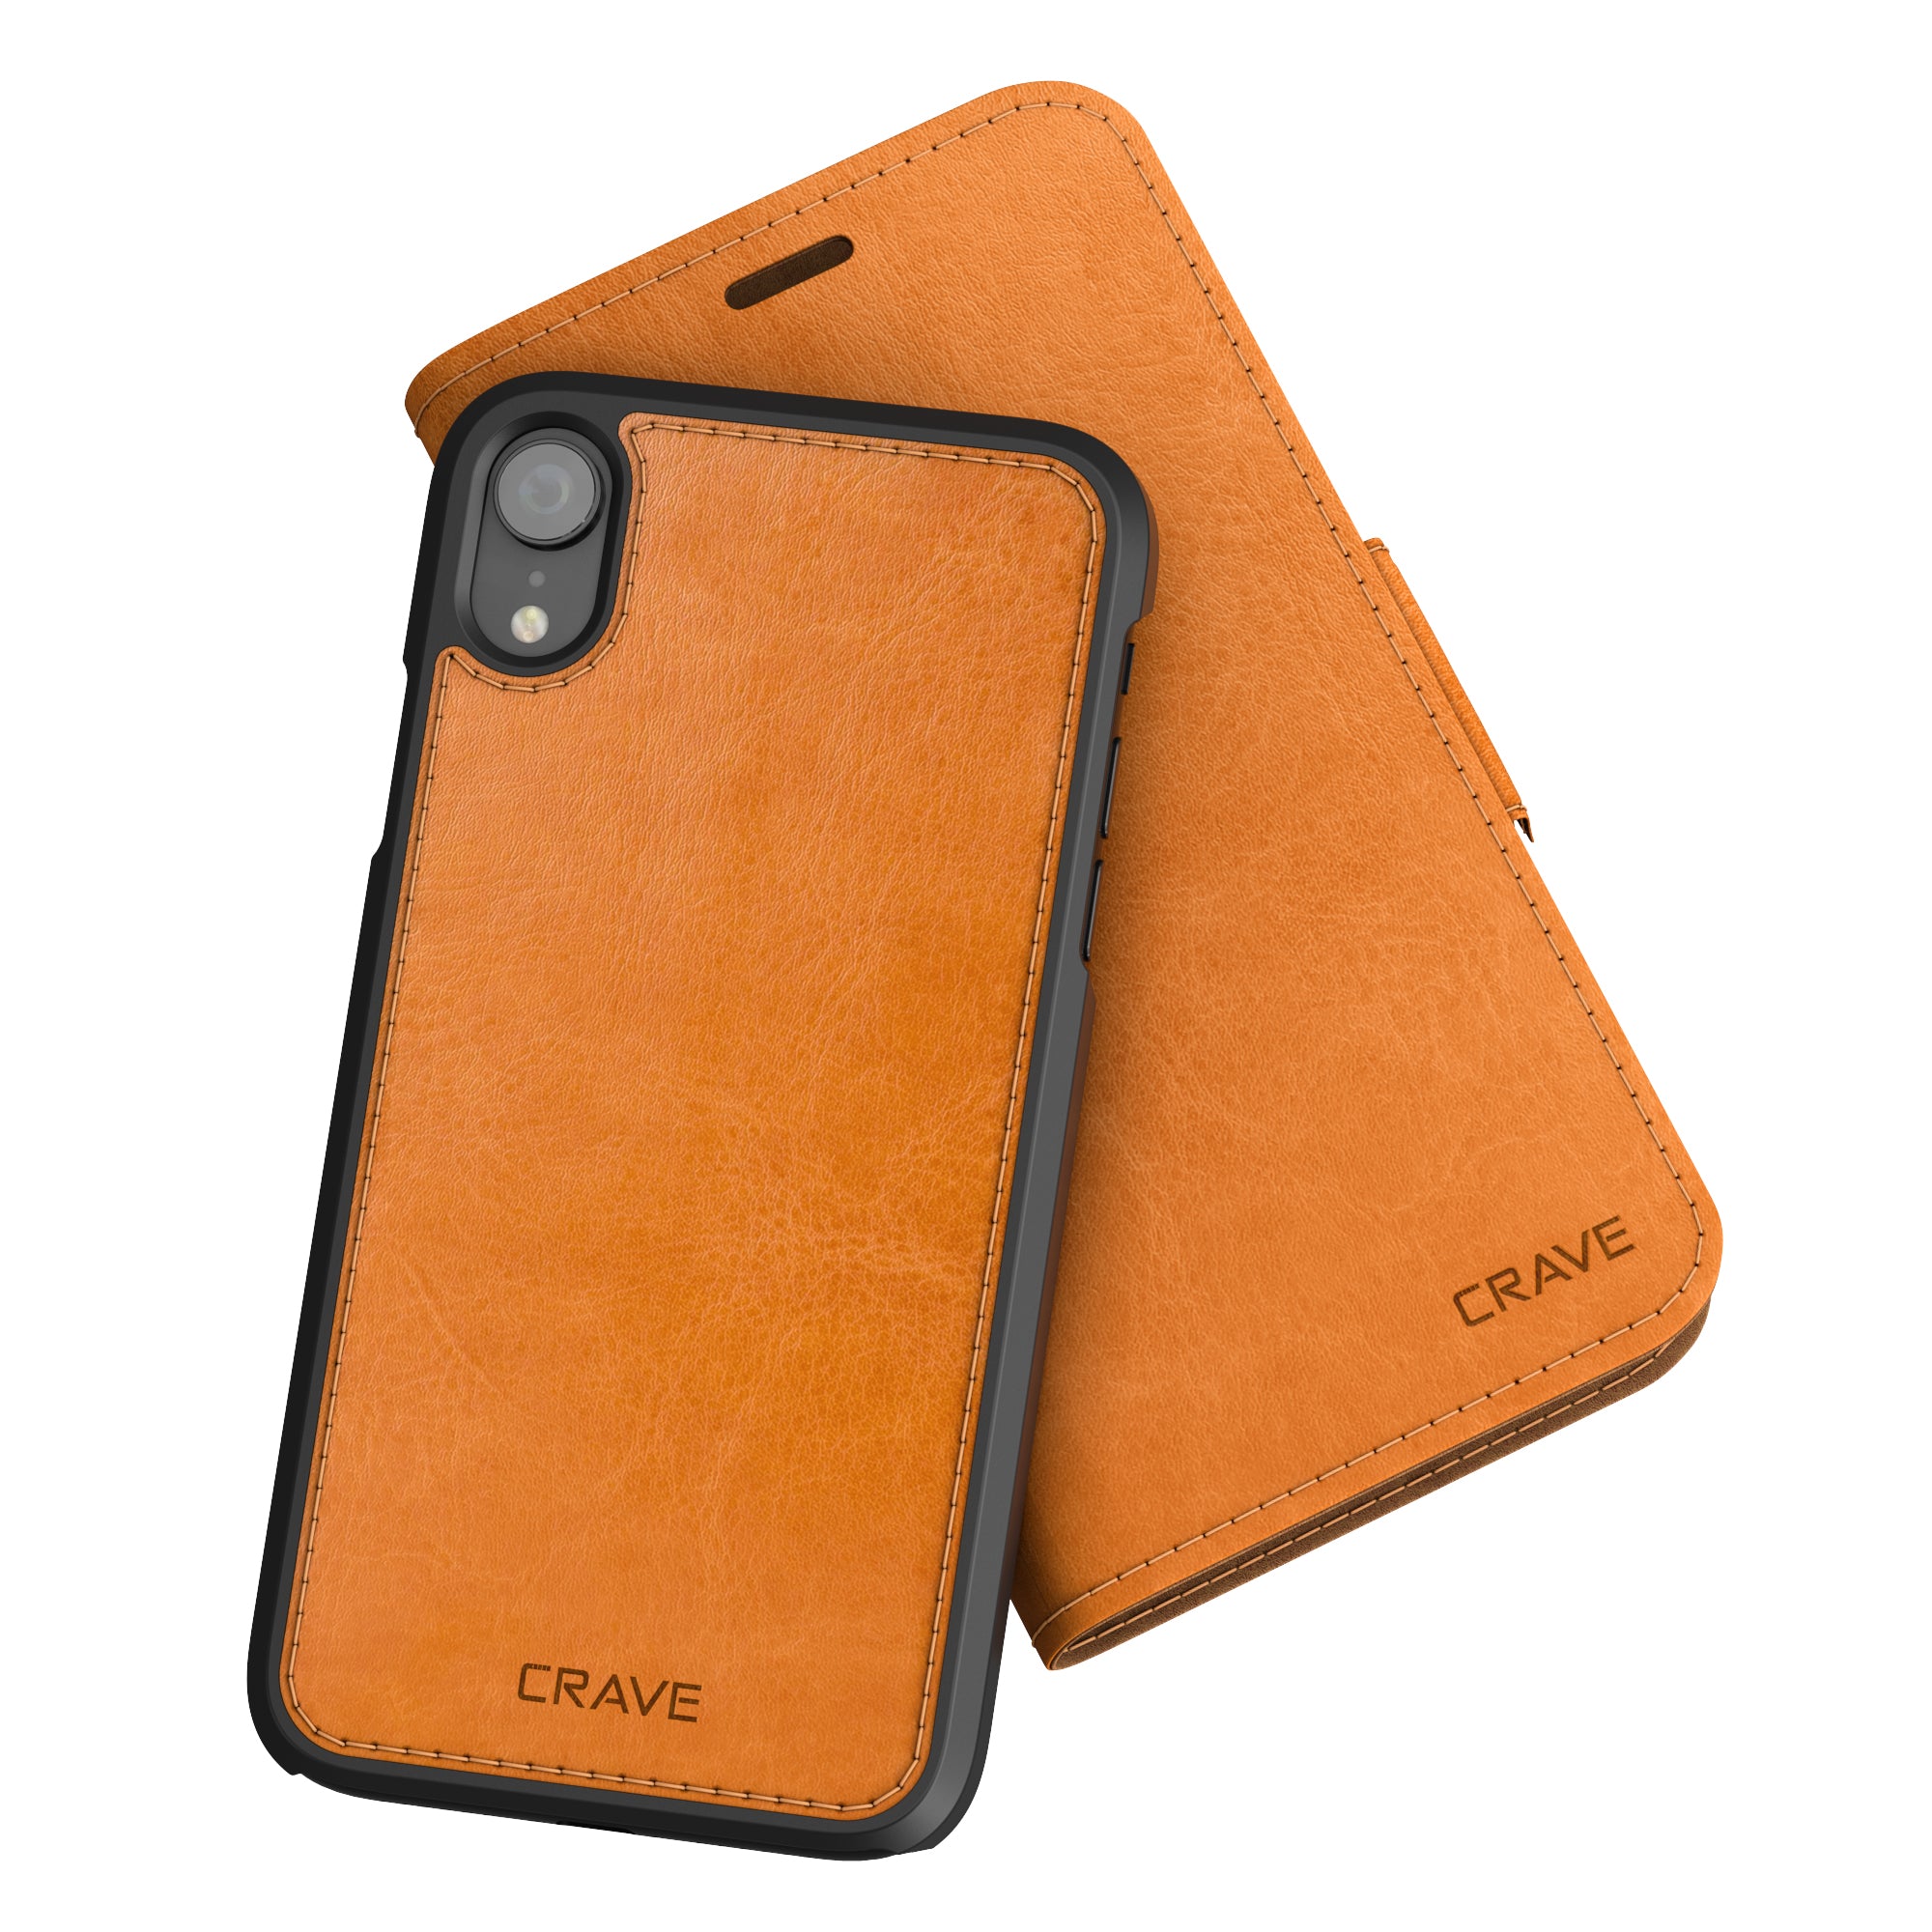 iPhone XR Case Vegan Leather Wallet, Leather Guard